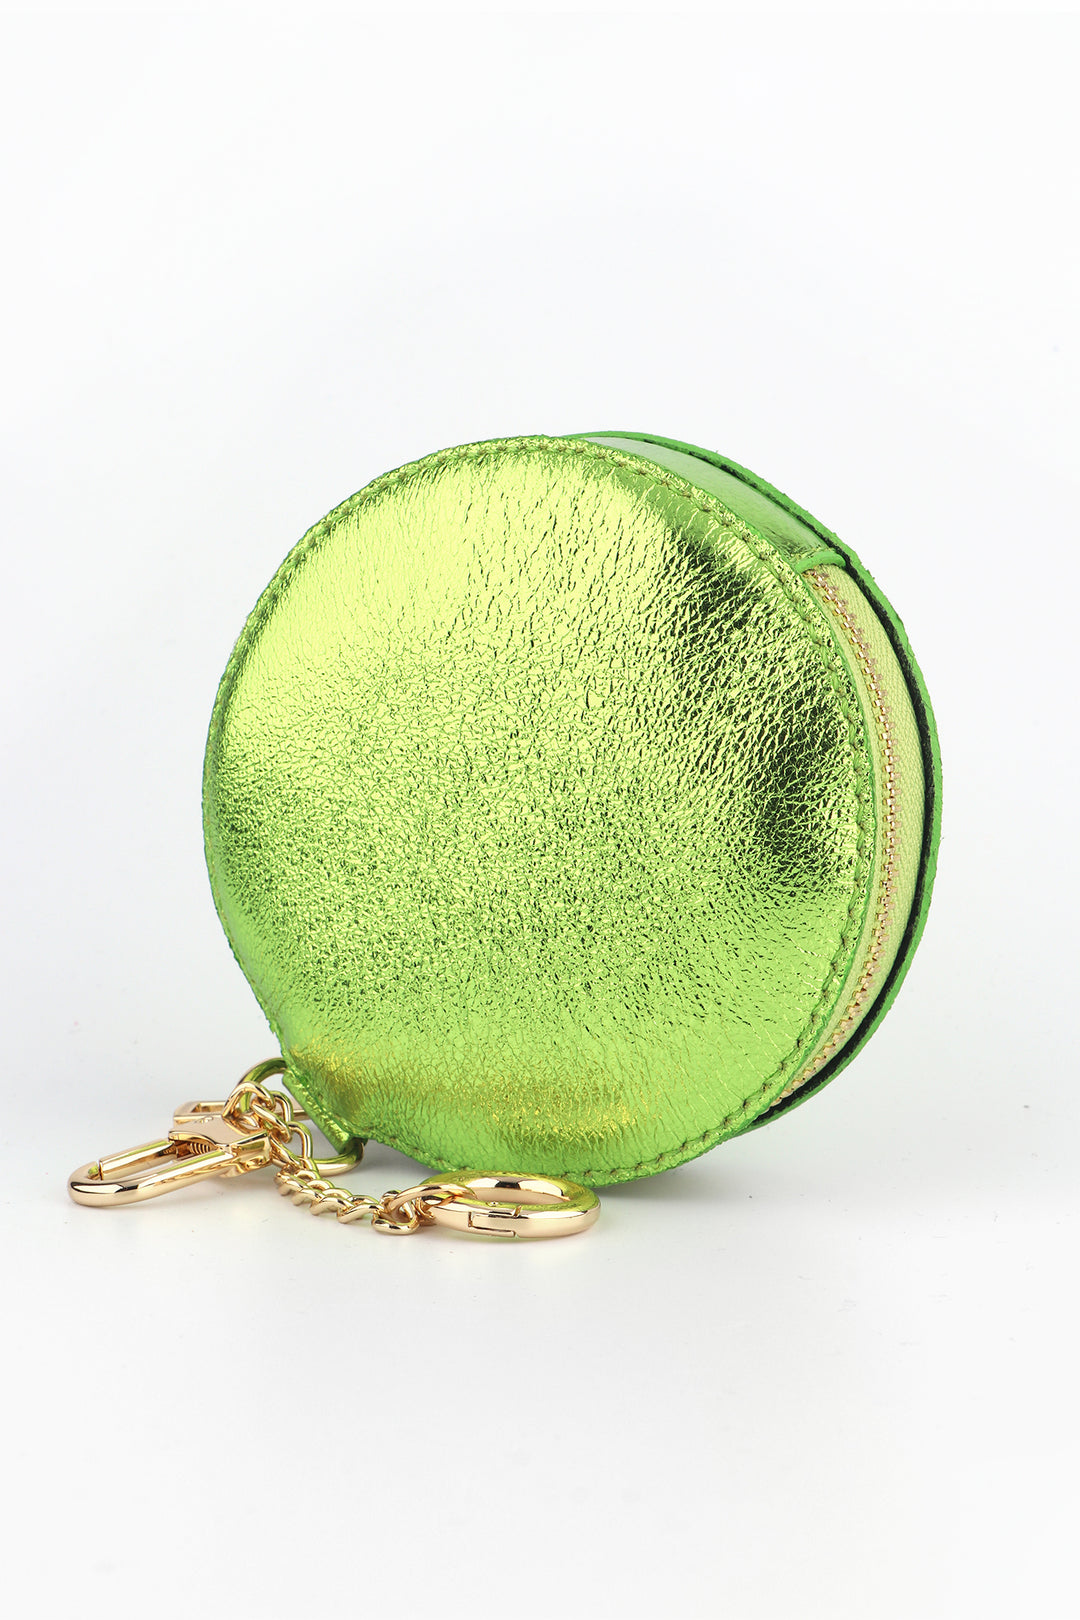 metallic lime green round leather coin purse with two key ring attachments